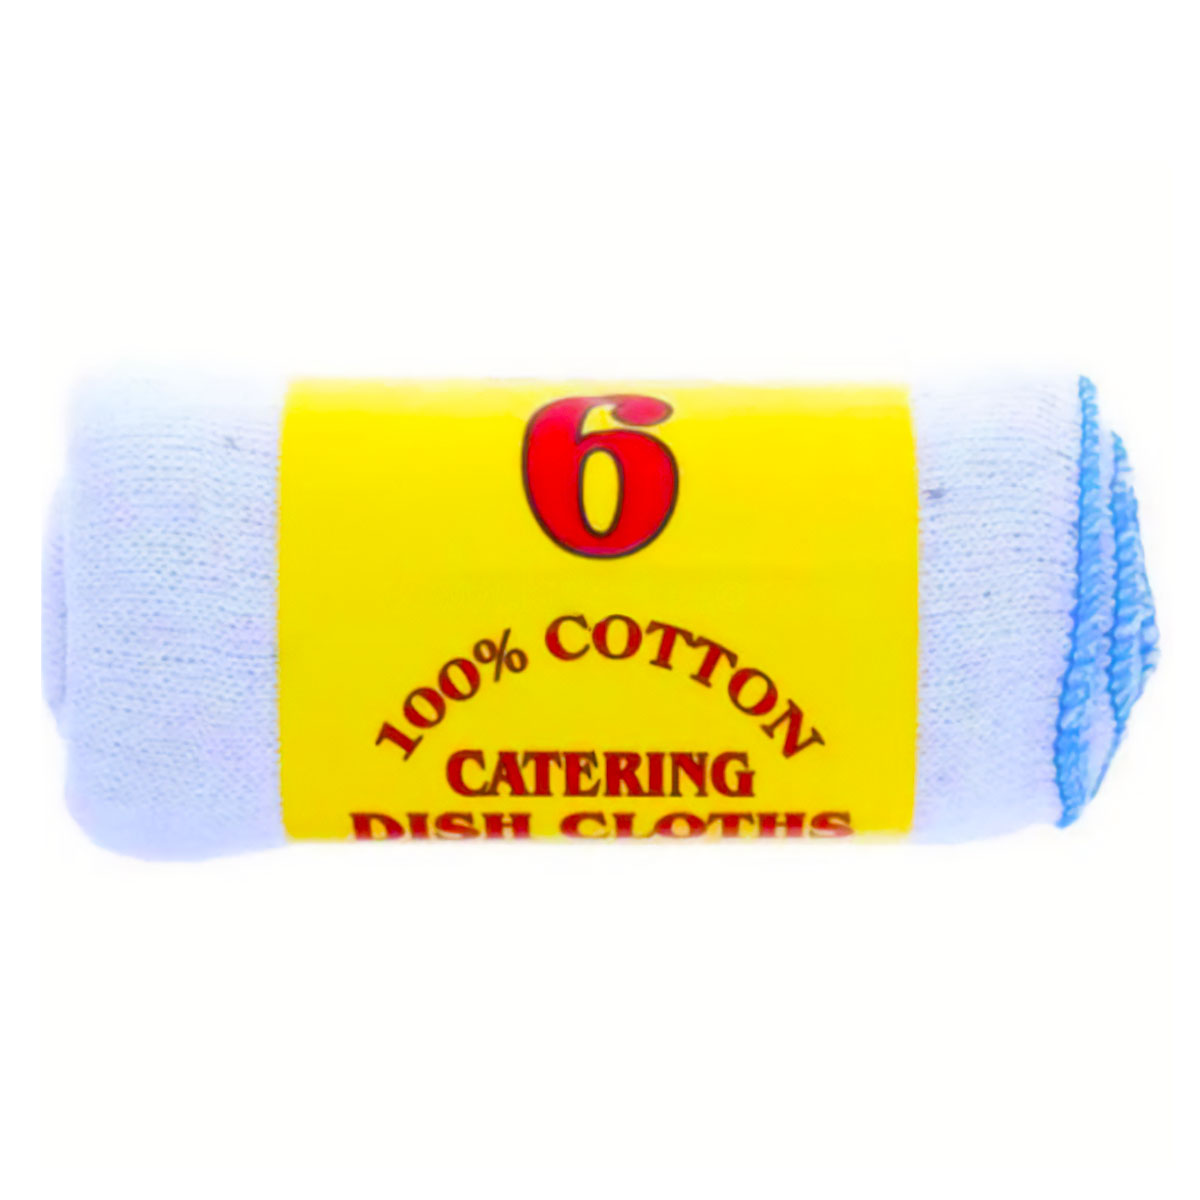 Royal Markets - Catering Dish Cloths - 6 Pack - Continental Food Store